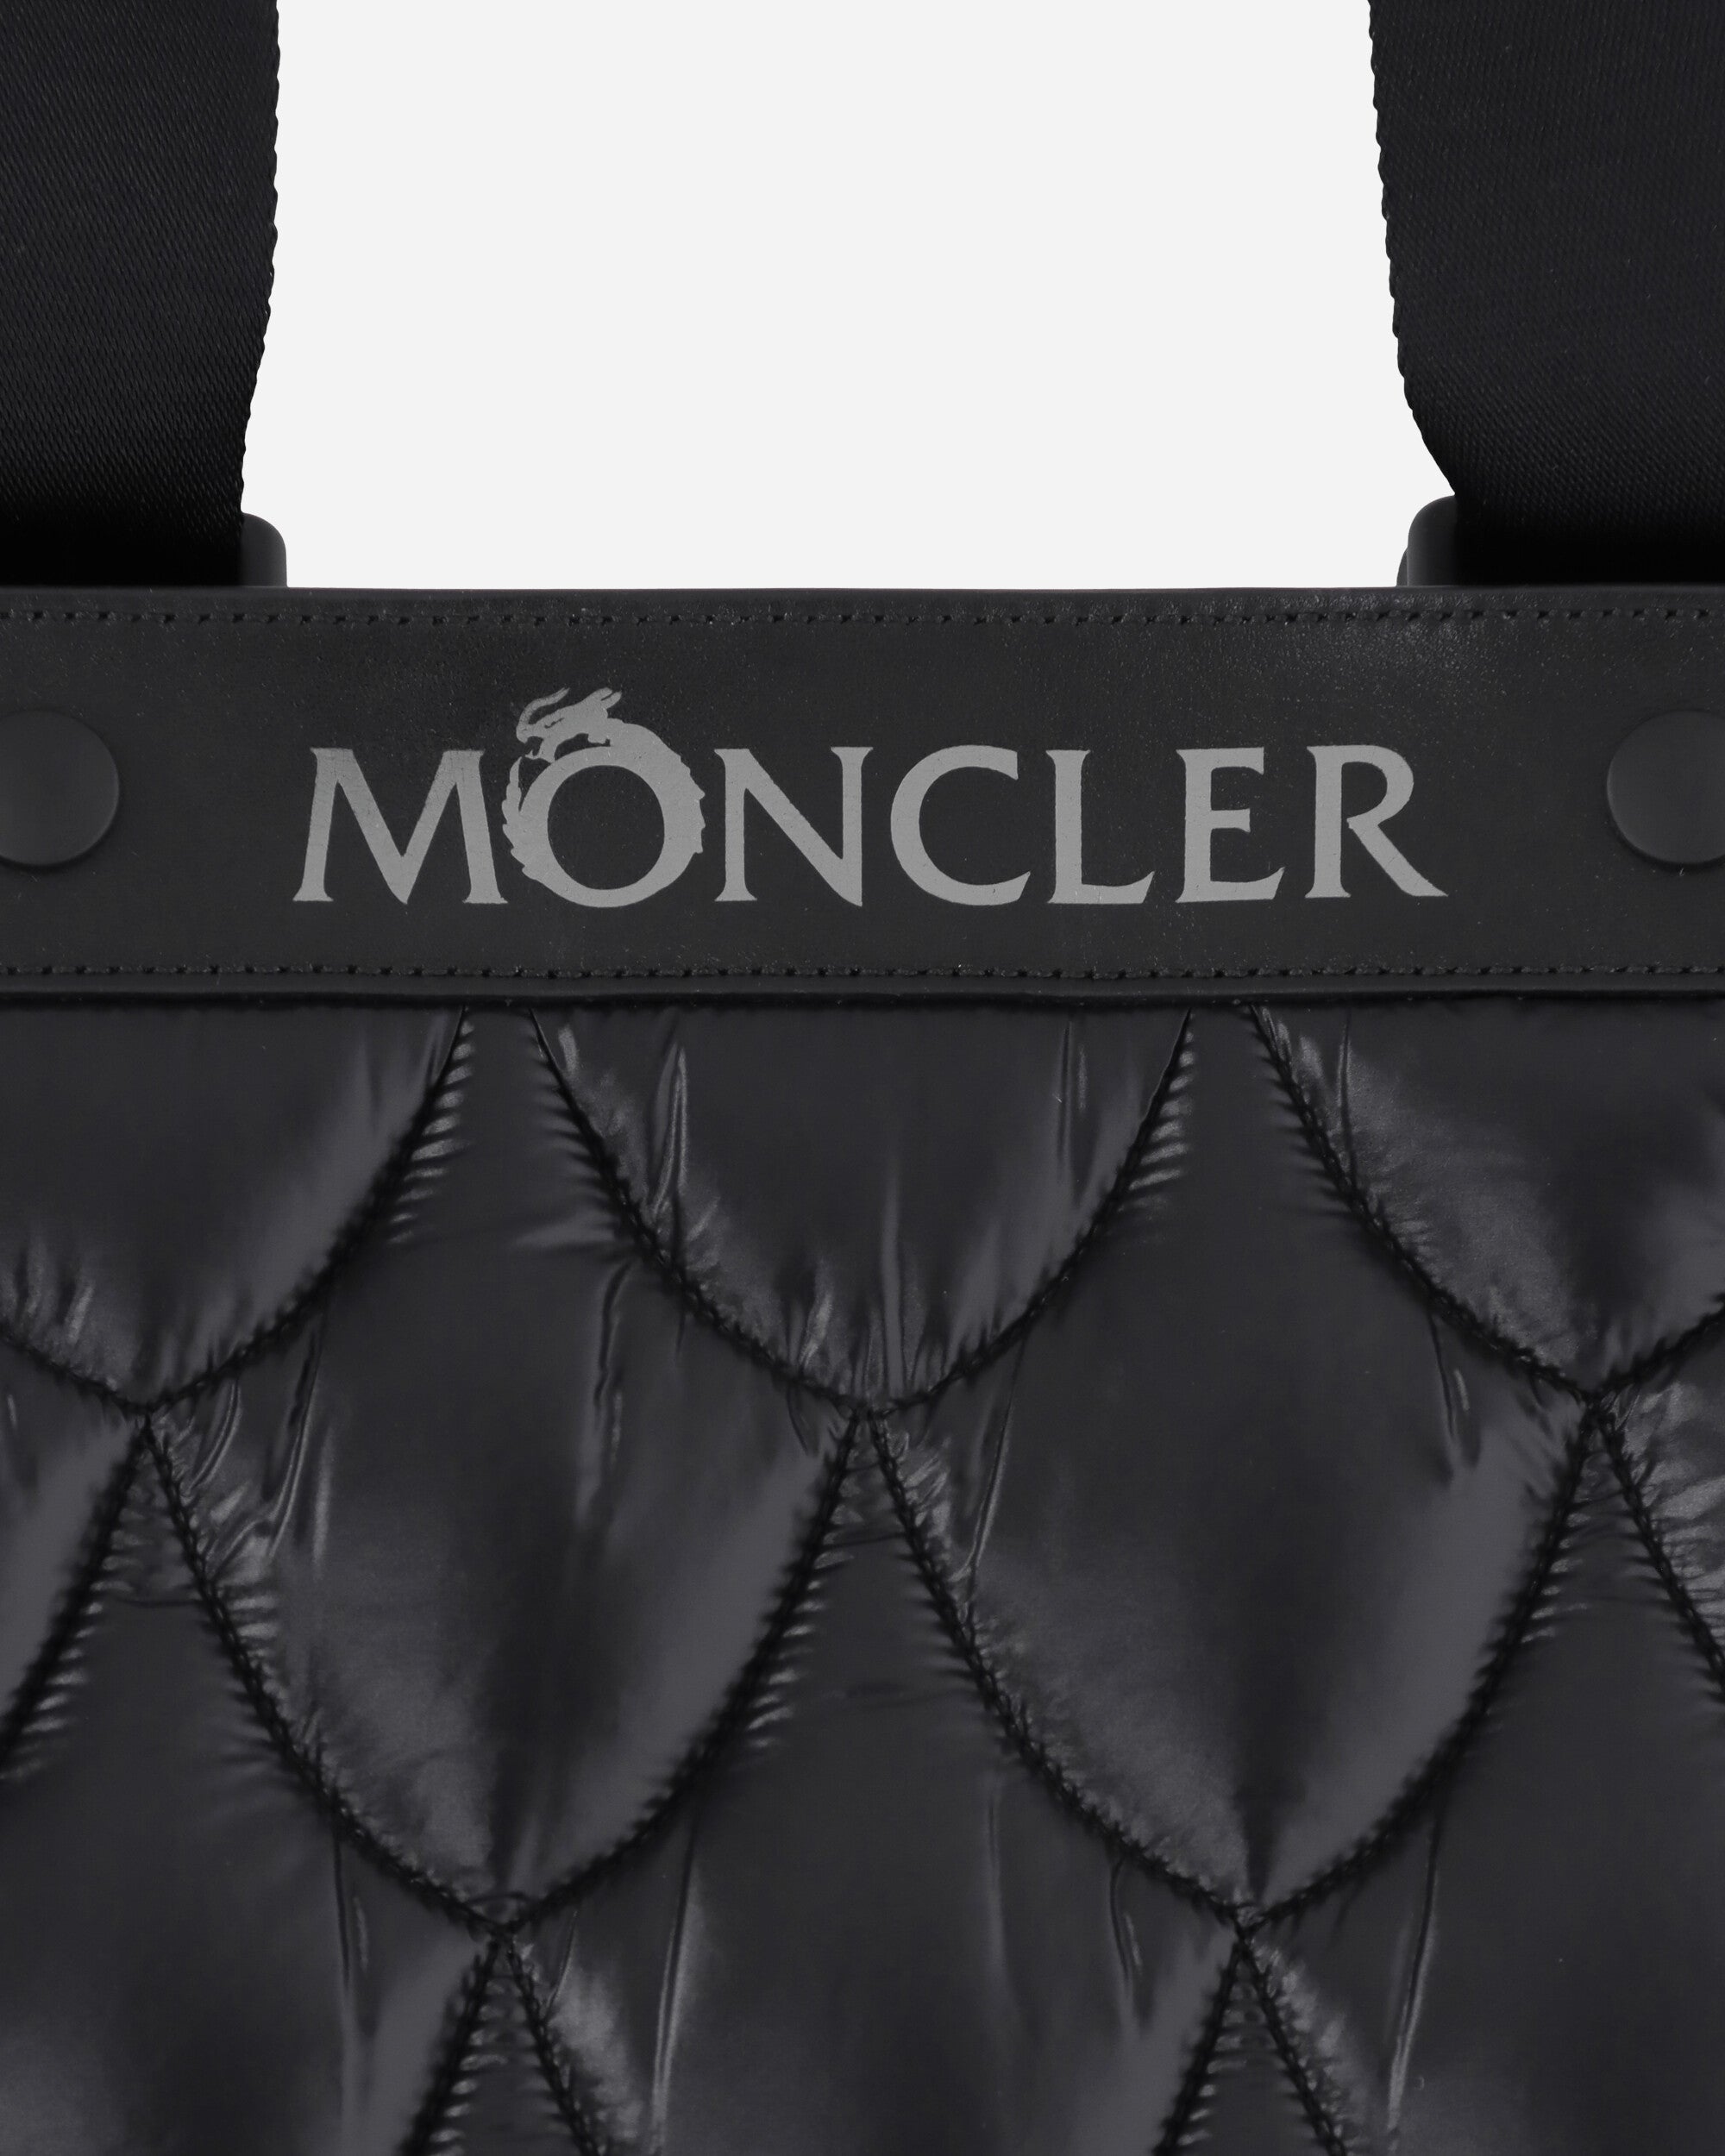 Moncler Tote Bag Chinese New Year Black Bags and Backpacks Tote Bags 5D00012M4102 999